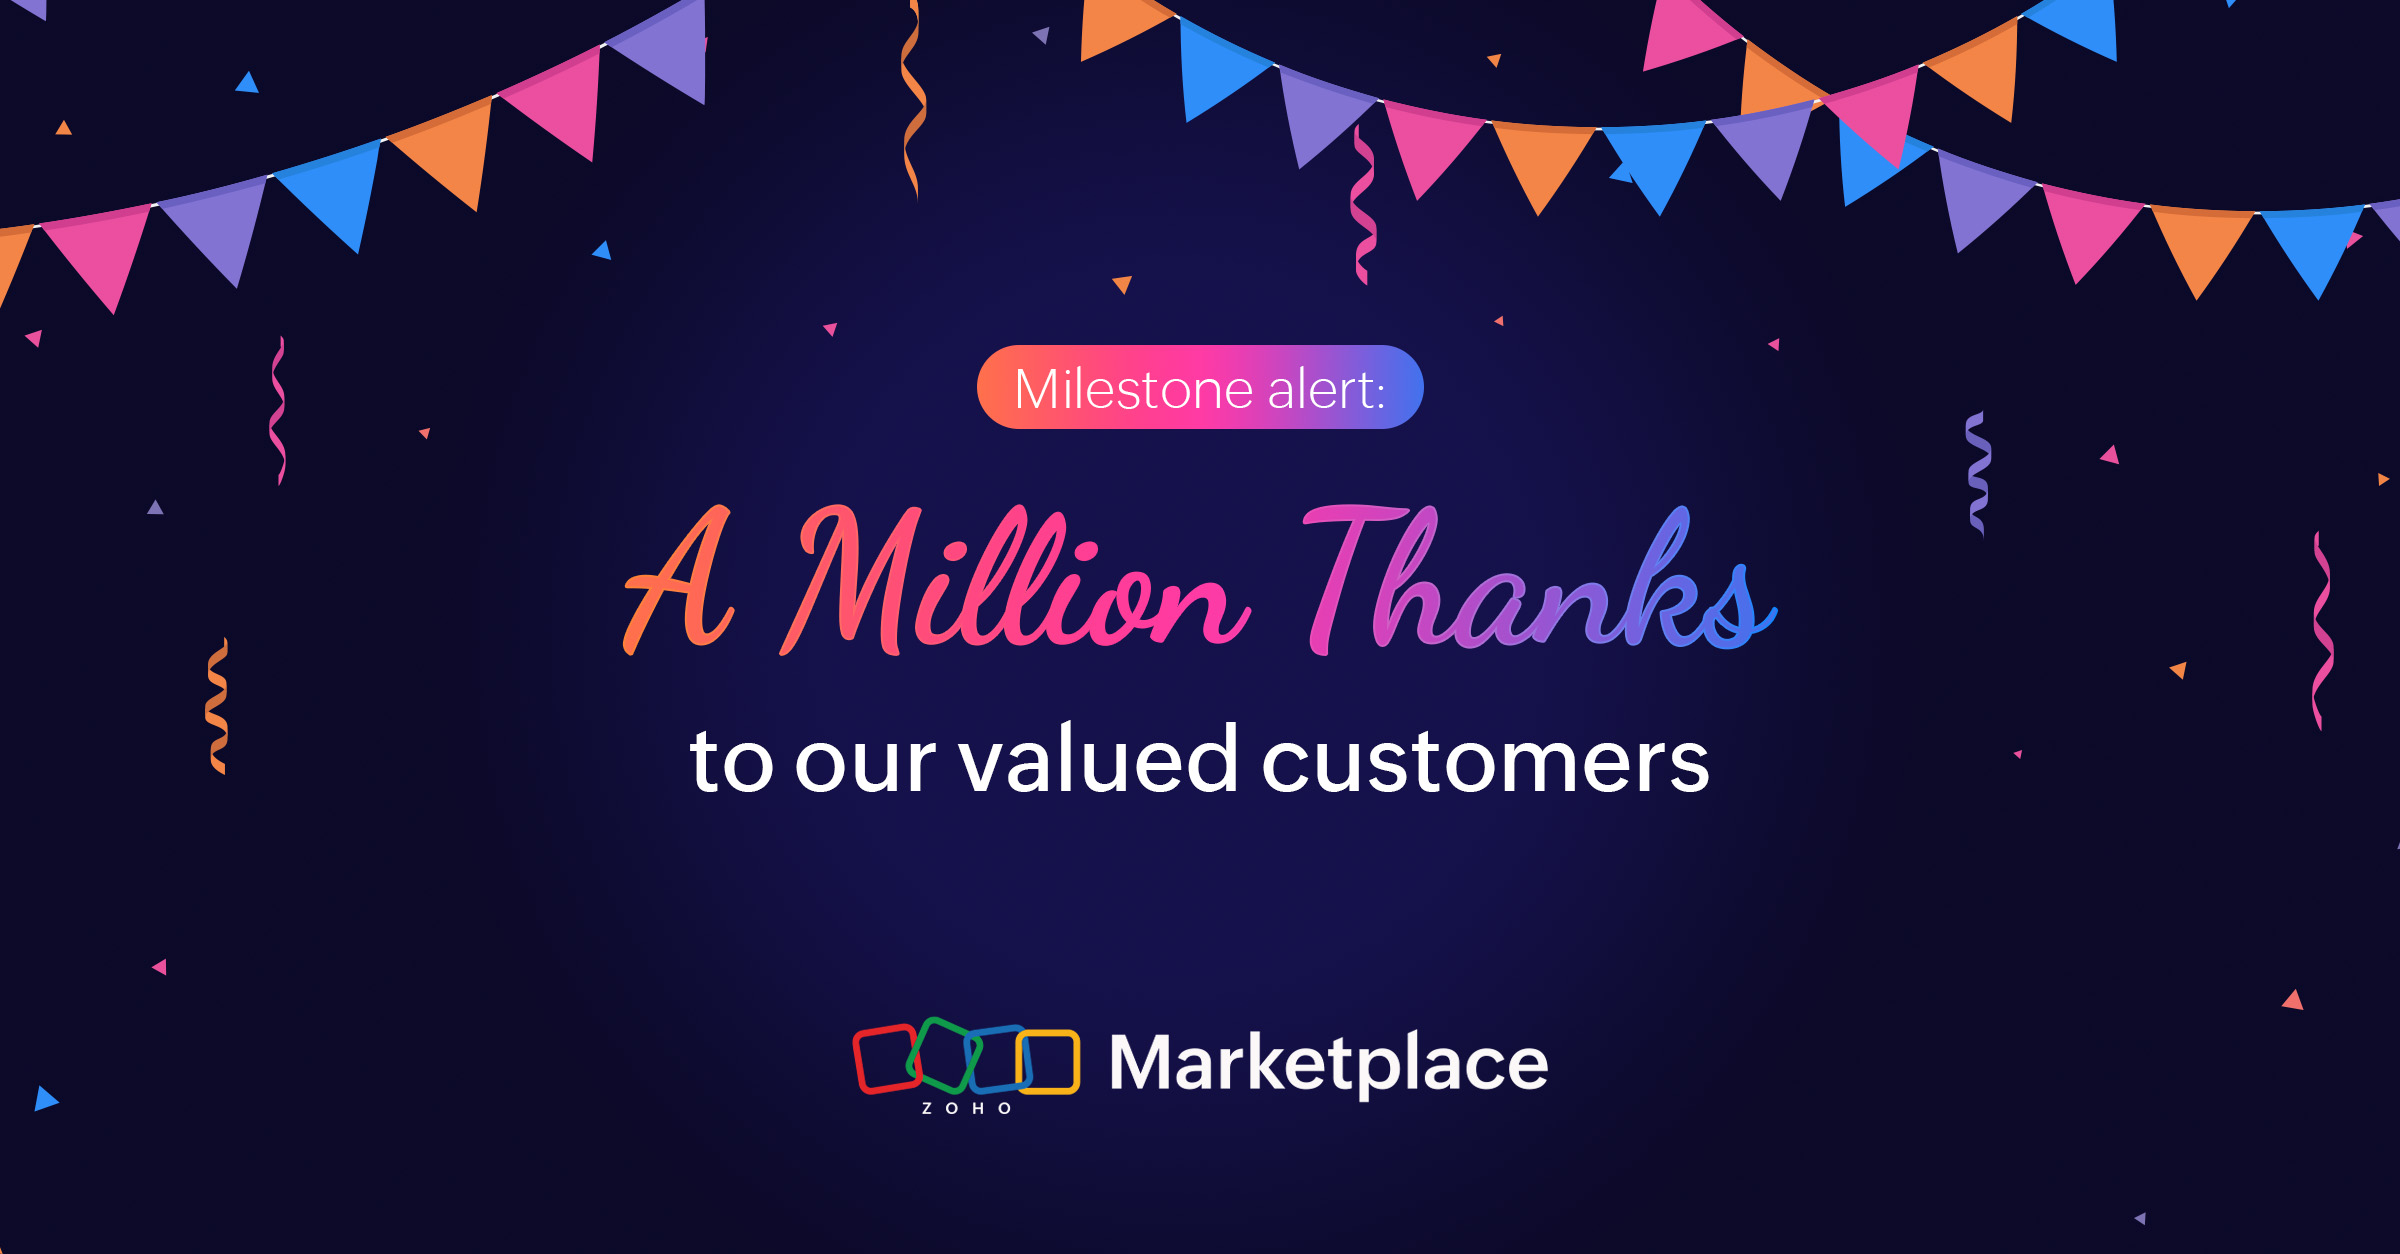 Milestone alert: A million thanks to our valued customers